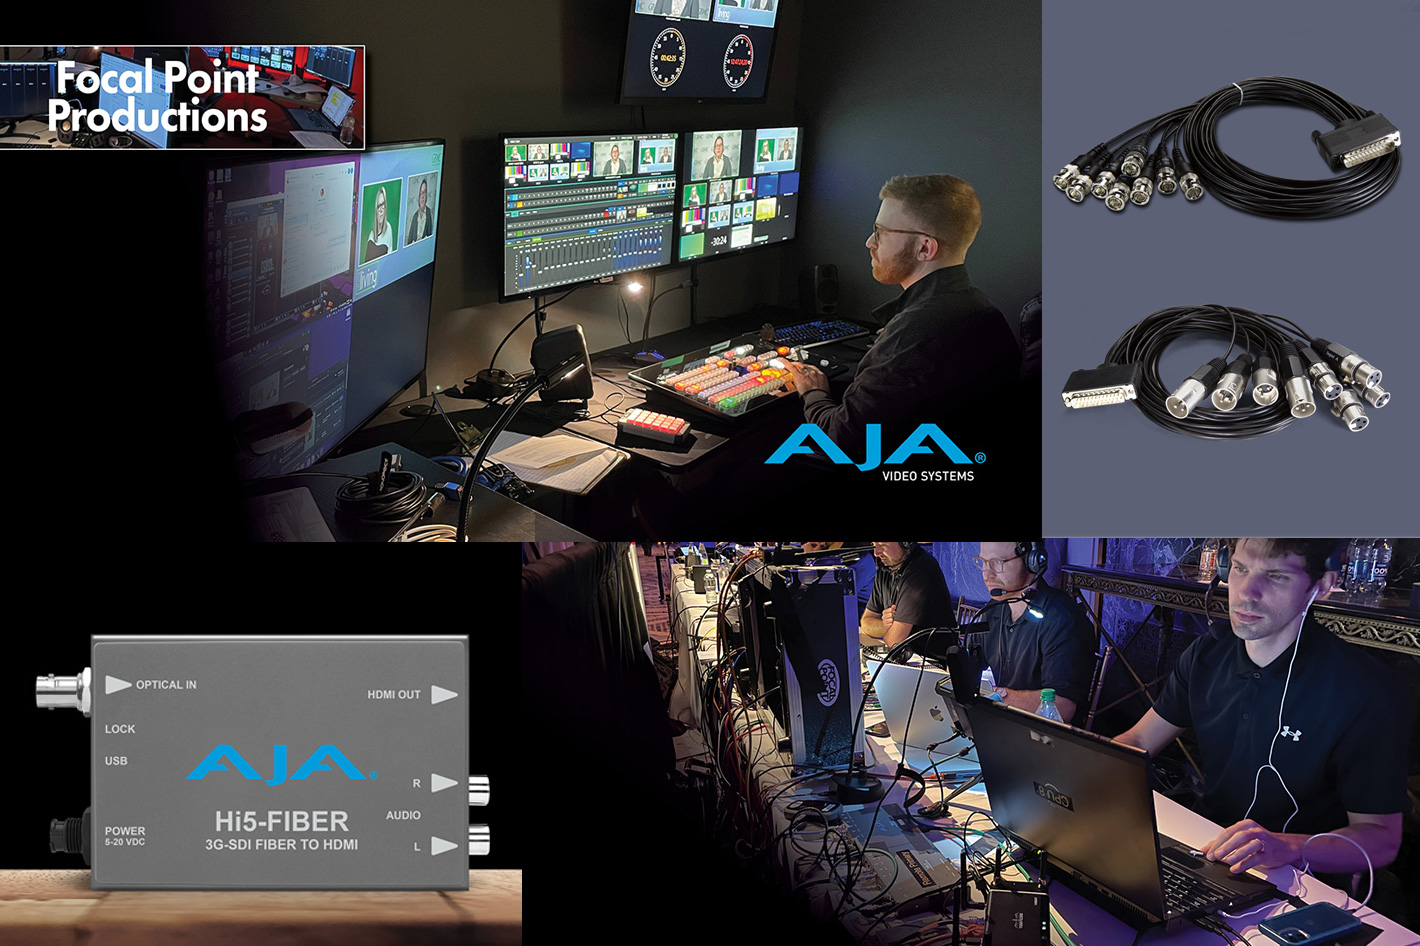 Focal Point Productions’ arsenal of AJA gear and how it is used